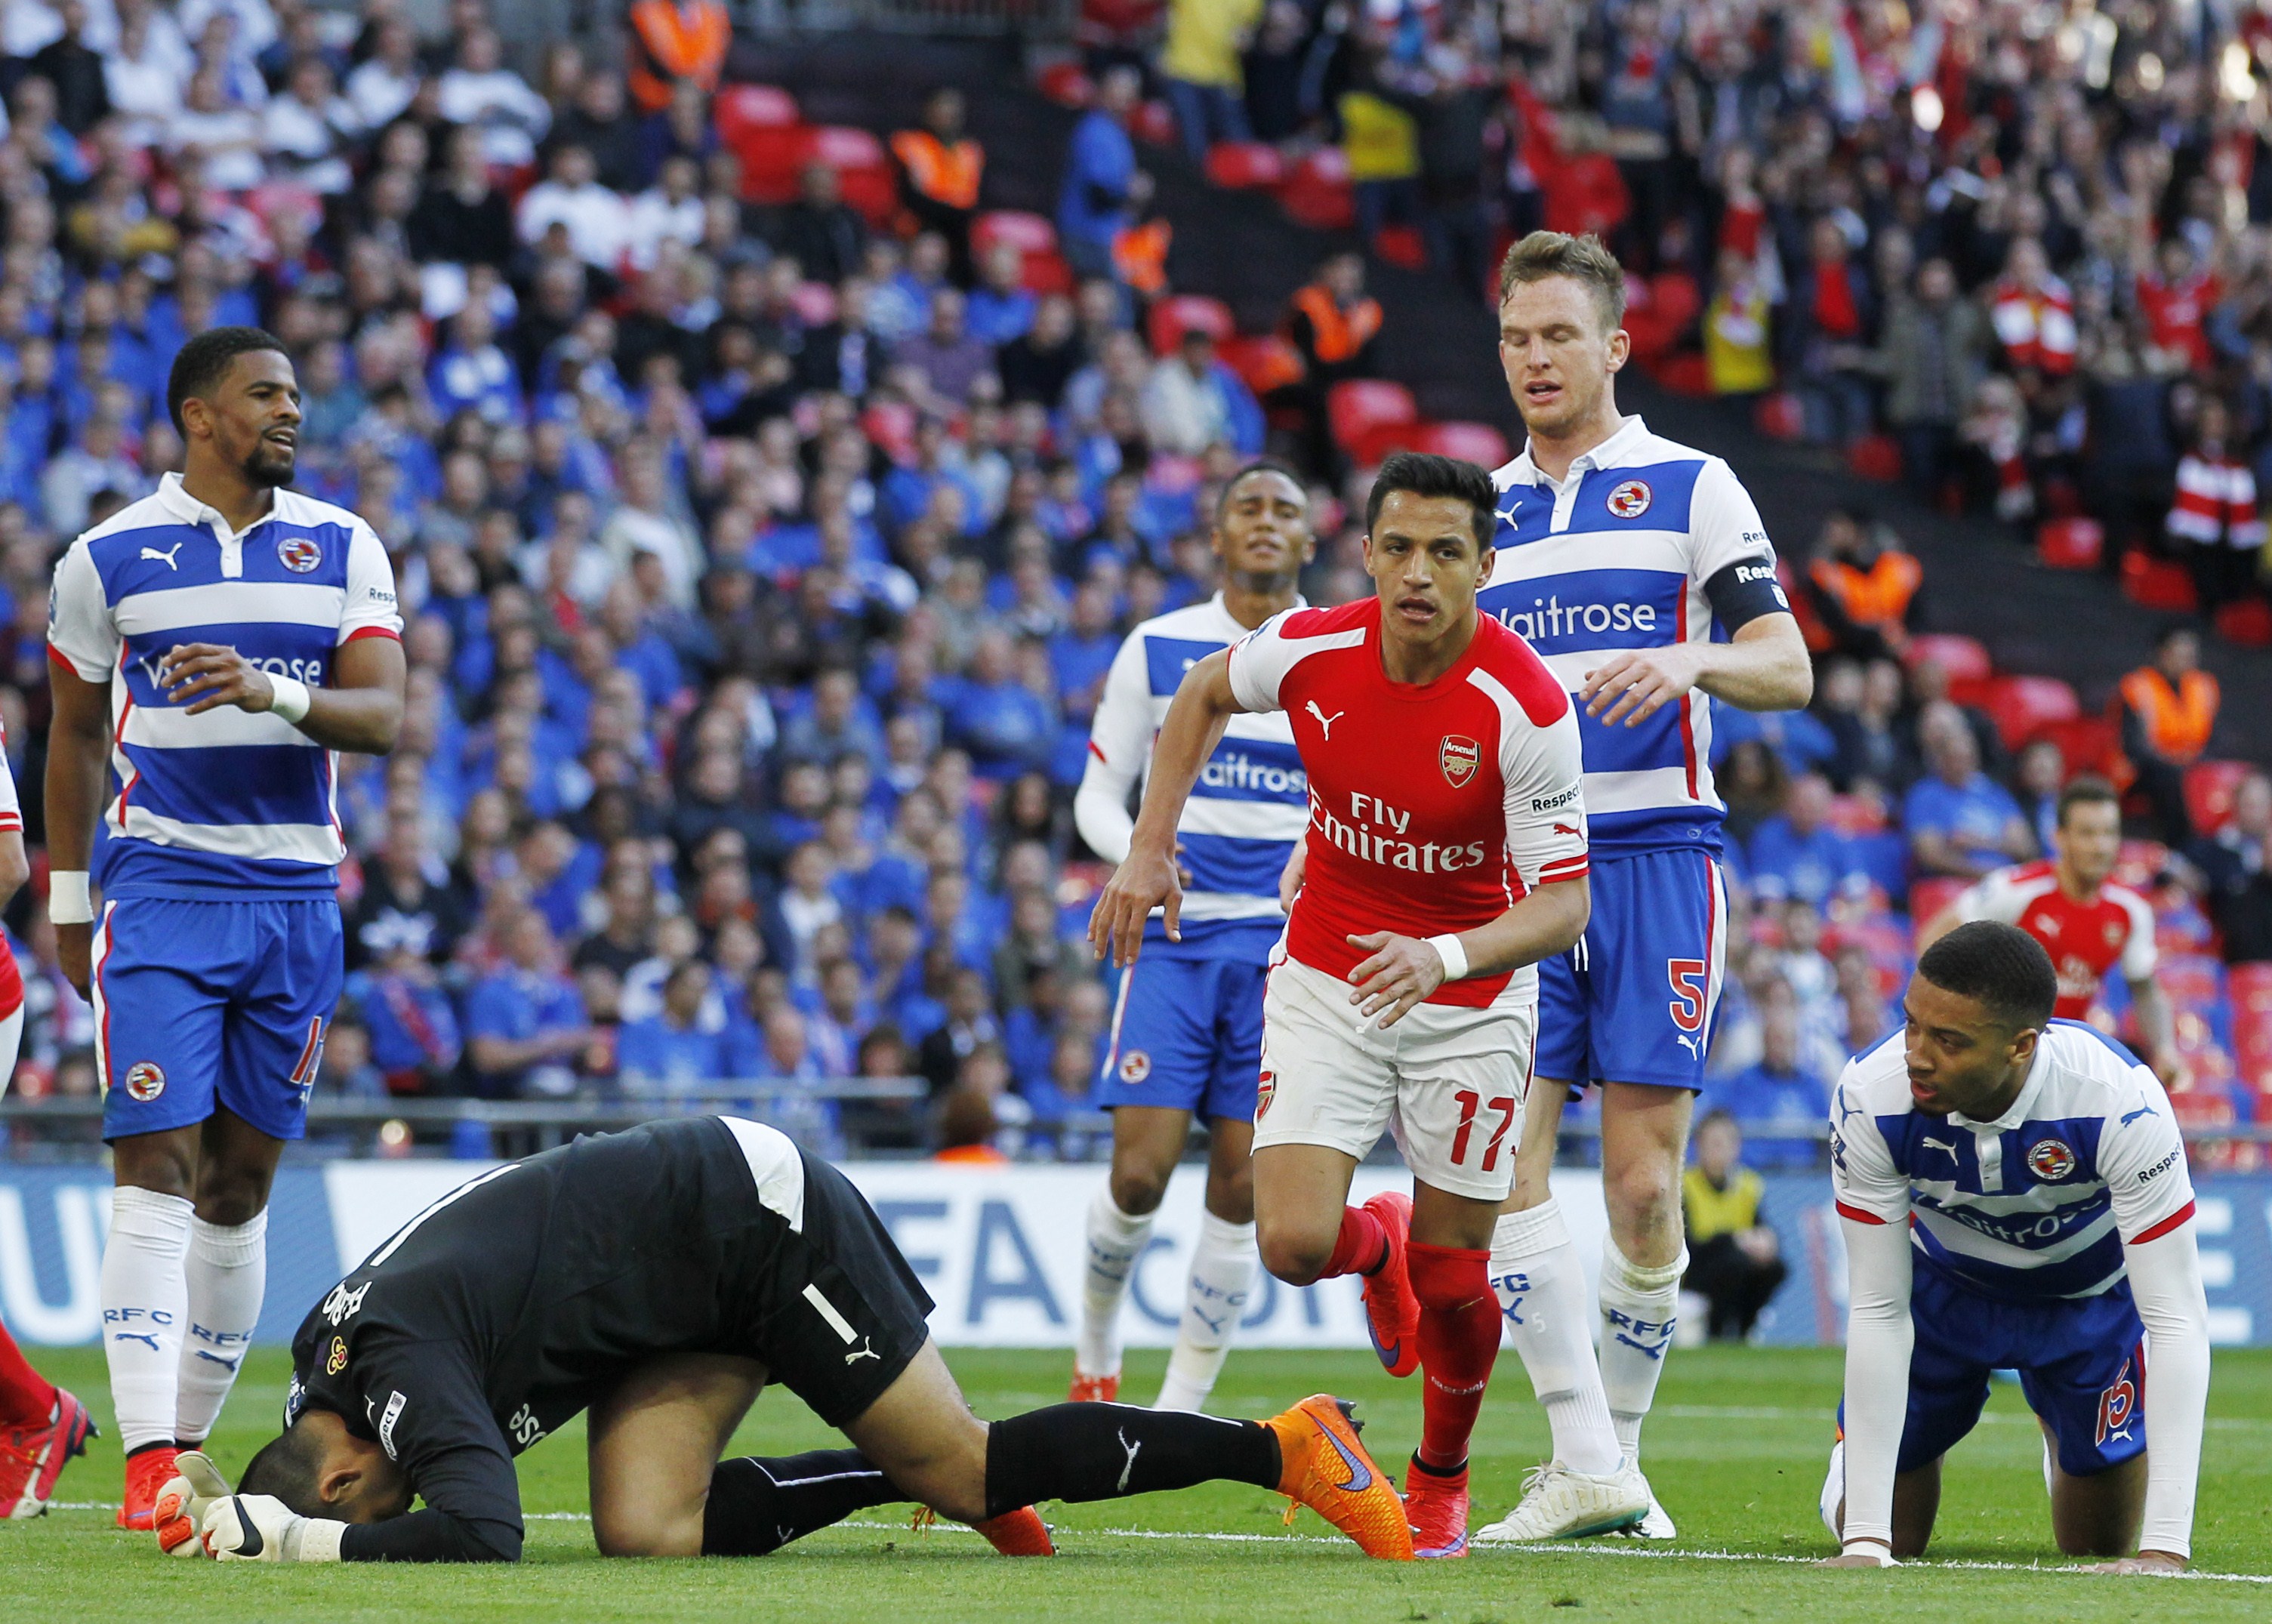 Arsenal's Chilean striker Alexis Sanchez (C-R) runs past Reading's Australian goalkeeper Adam Federici (L) after scoring during the FA Cup semi-final between Arsenal and Reading at Wembley stadium in London on April 18, 2015.
AFP PHOTO / IAN KINGTON
NOT FOR MARKETING OR ADVERTISING USE / RESTRICTED TO EDITORIAL USE        (Photo credit should read IAN KINGTON/AFP/Getty Images)